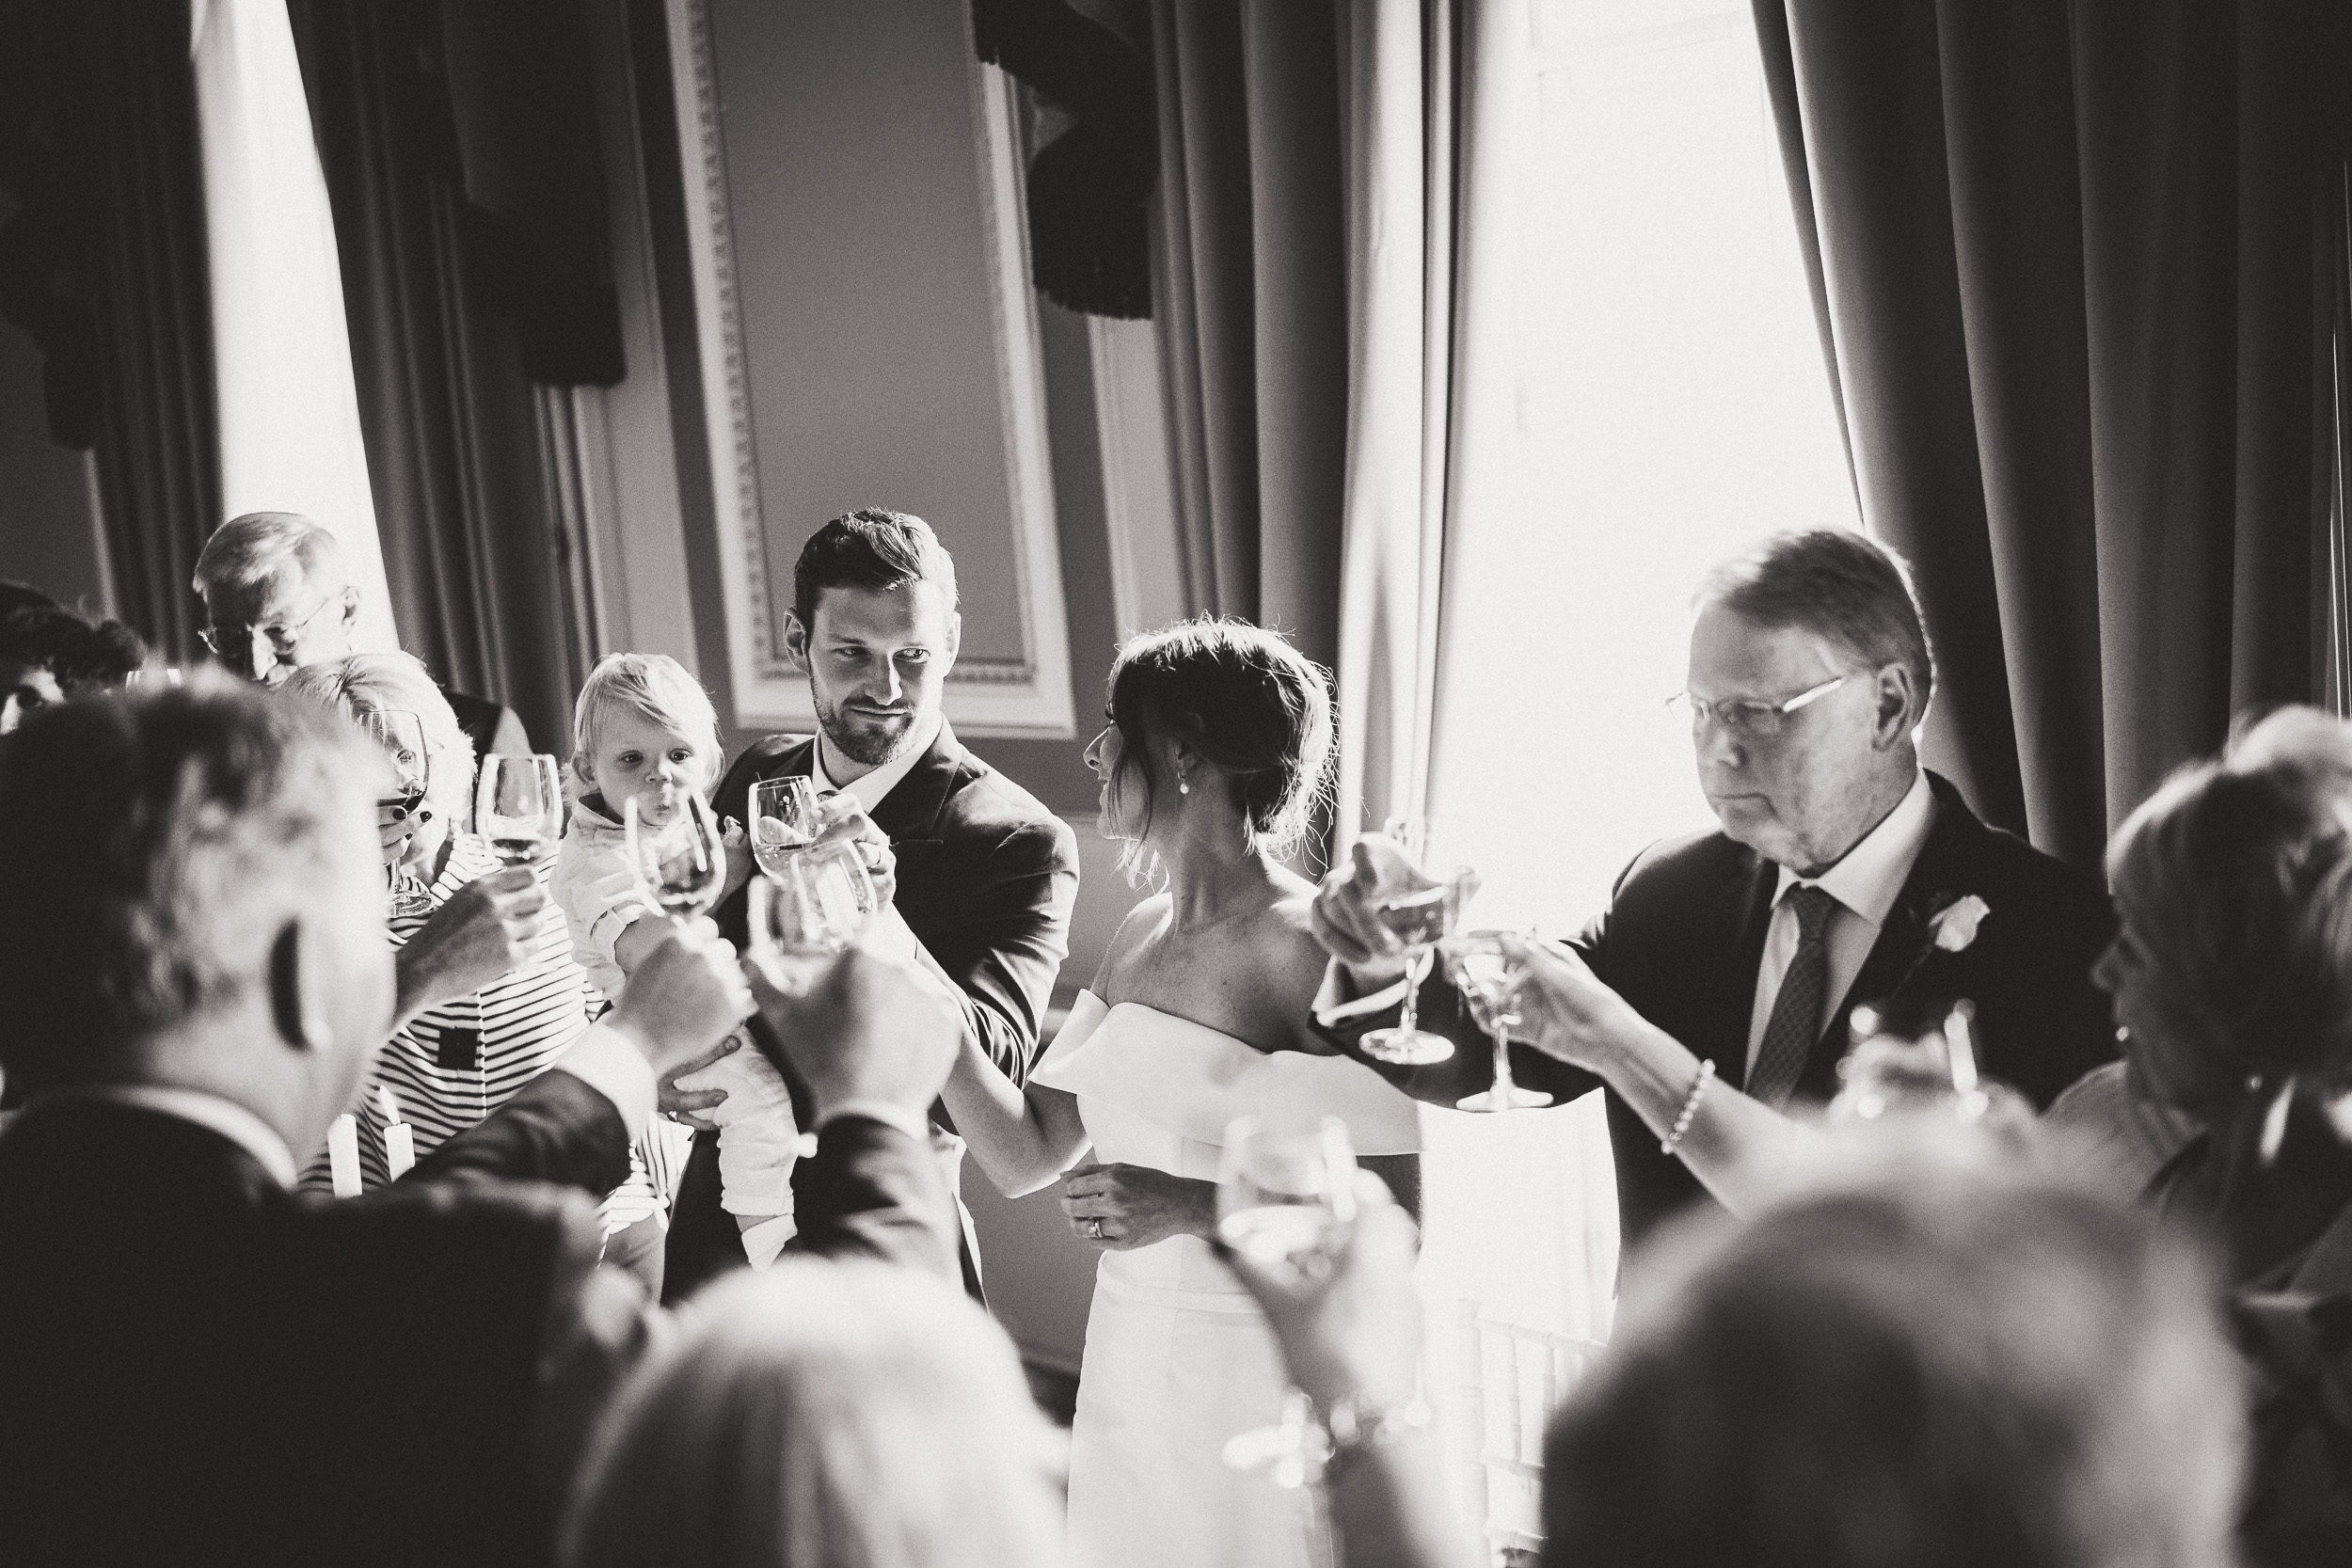 A wedding photographer captures a black and white photo of the bride and groom toasting.